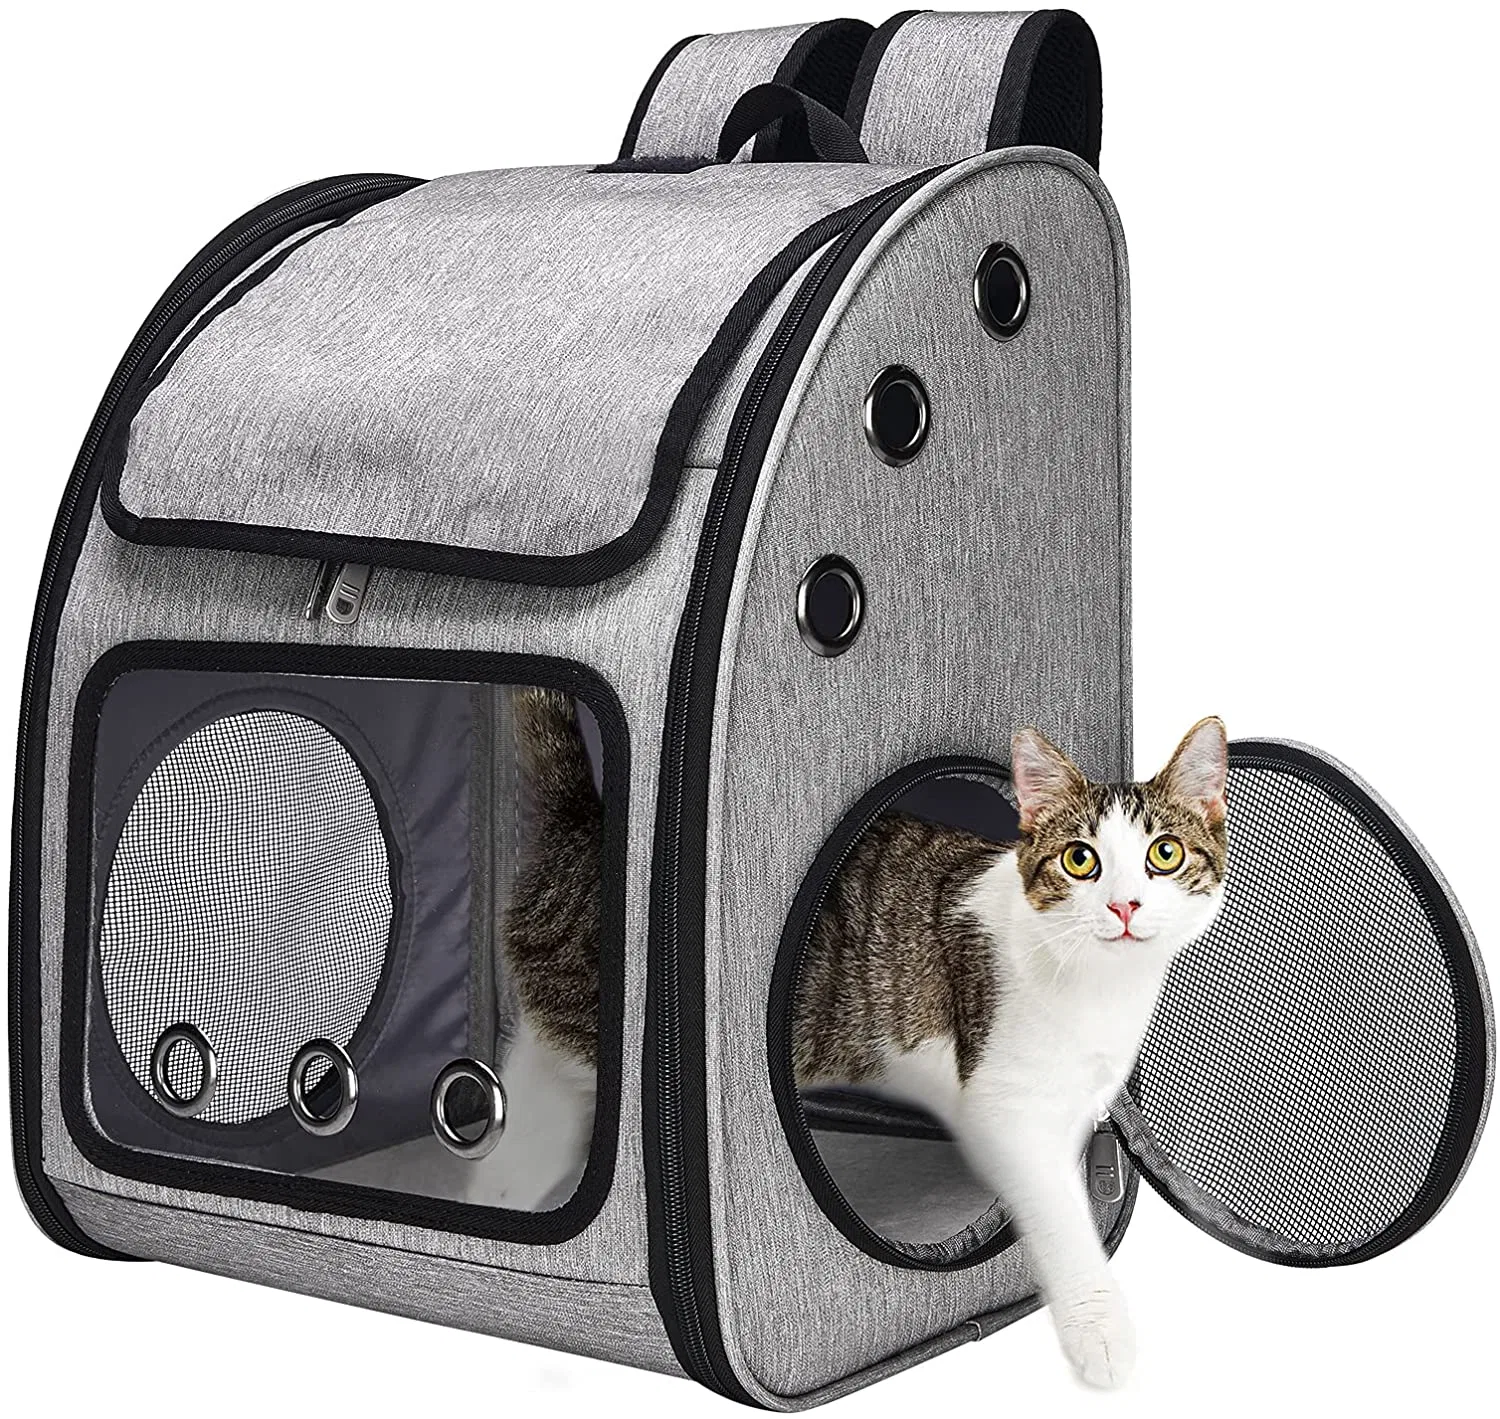 High quality/High cost performance Top Opening Pet Products Foldable Mesh Breathable Pet Carries Backpack Cat Dog Small Animal Carrier Bag